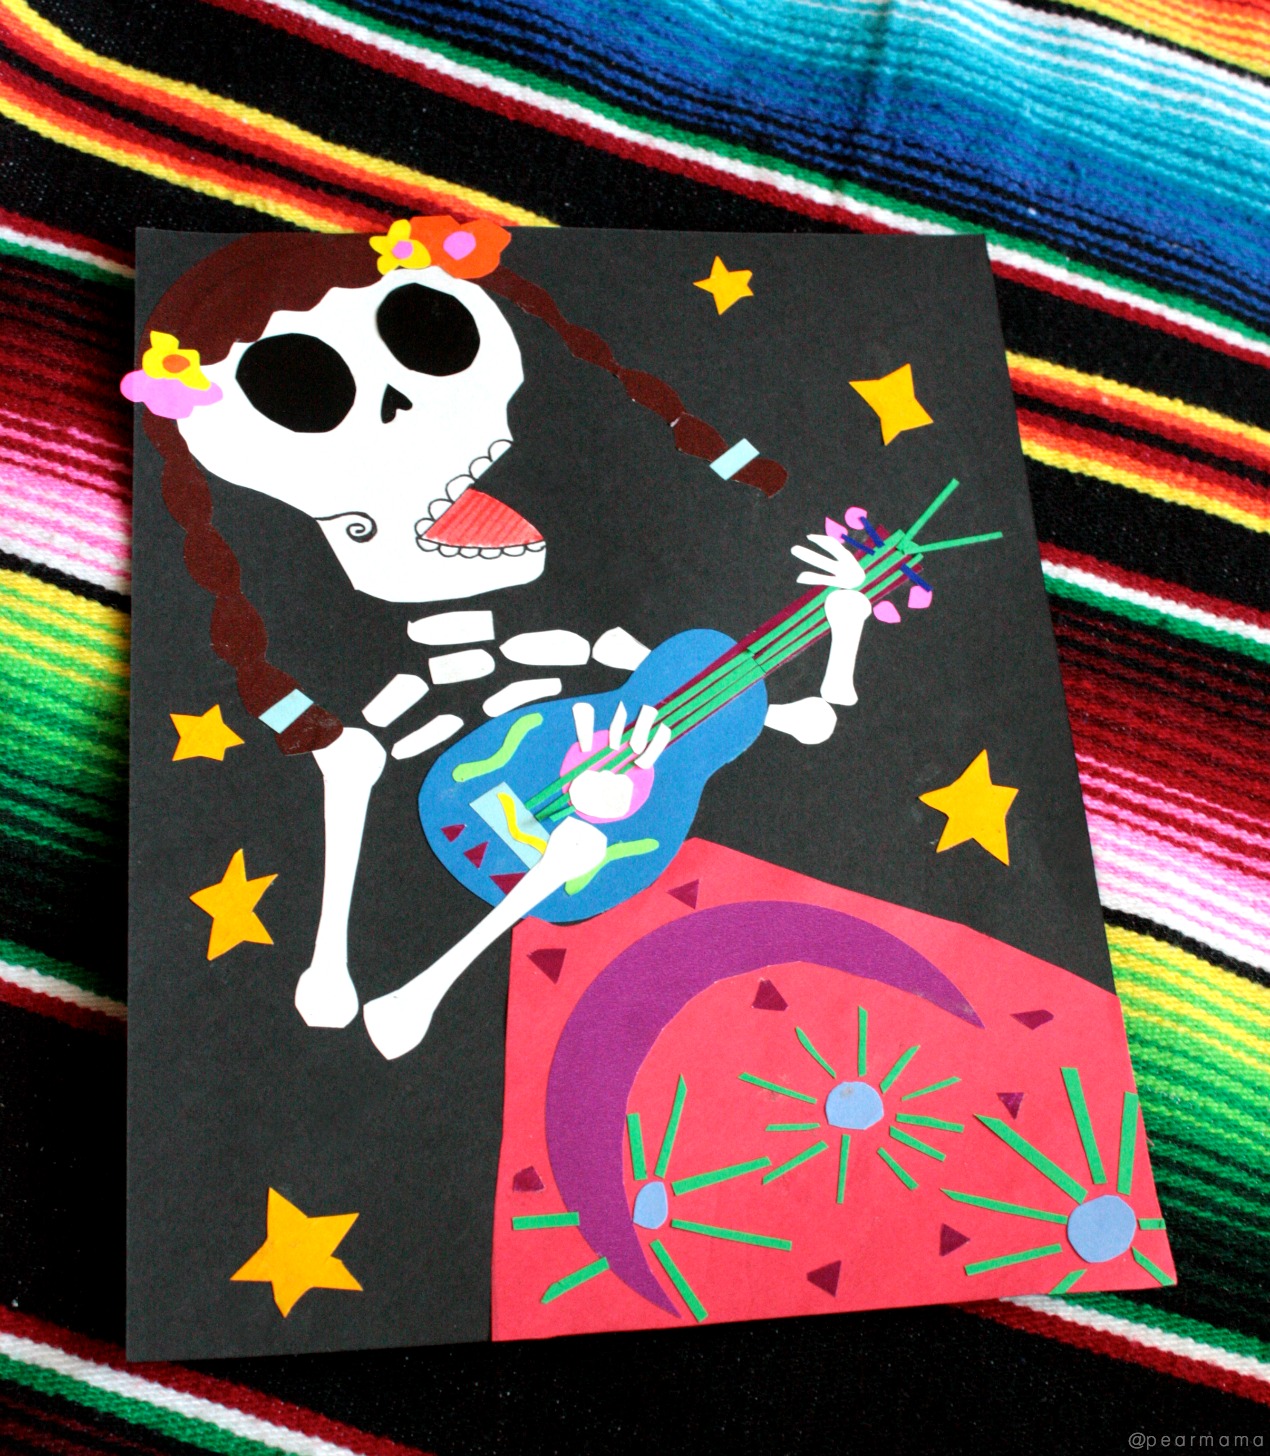 Using your favorite book for inspiration, make this calavera-inspired paper collage with your kids to celebrate the Mexican tradition of Day of the Dead.